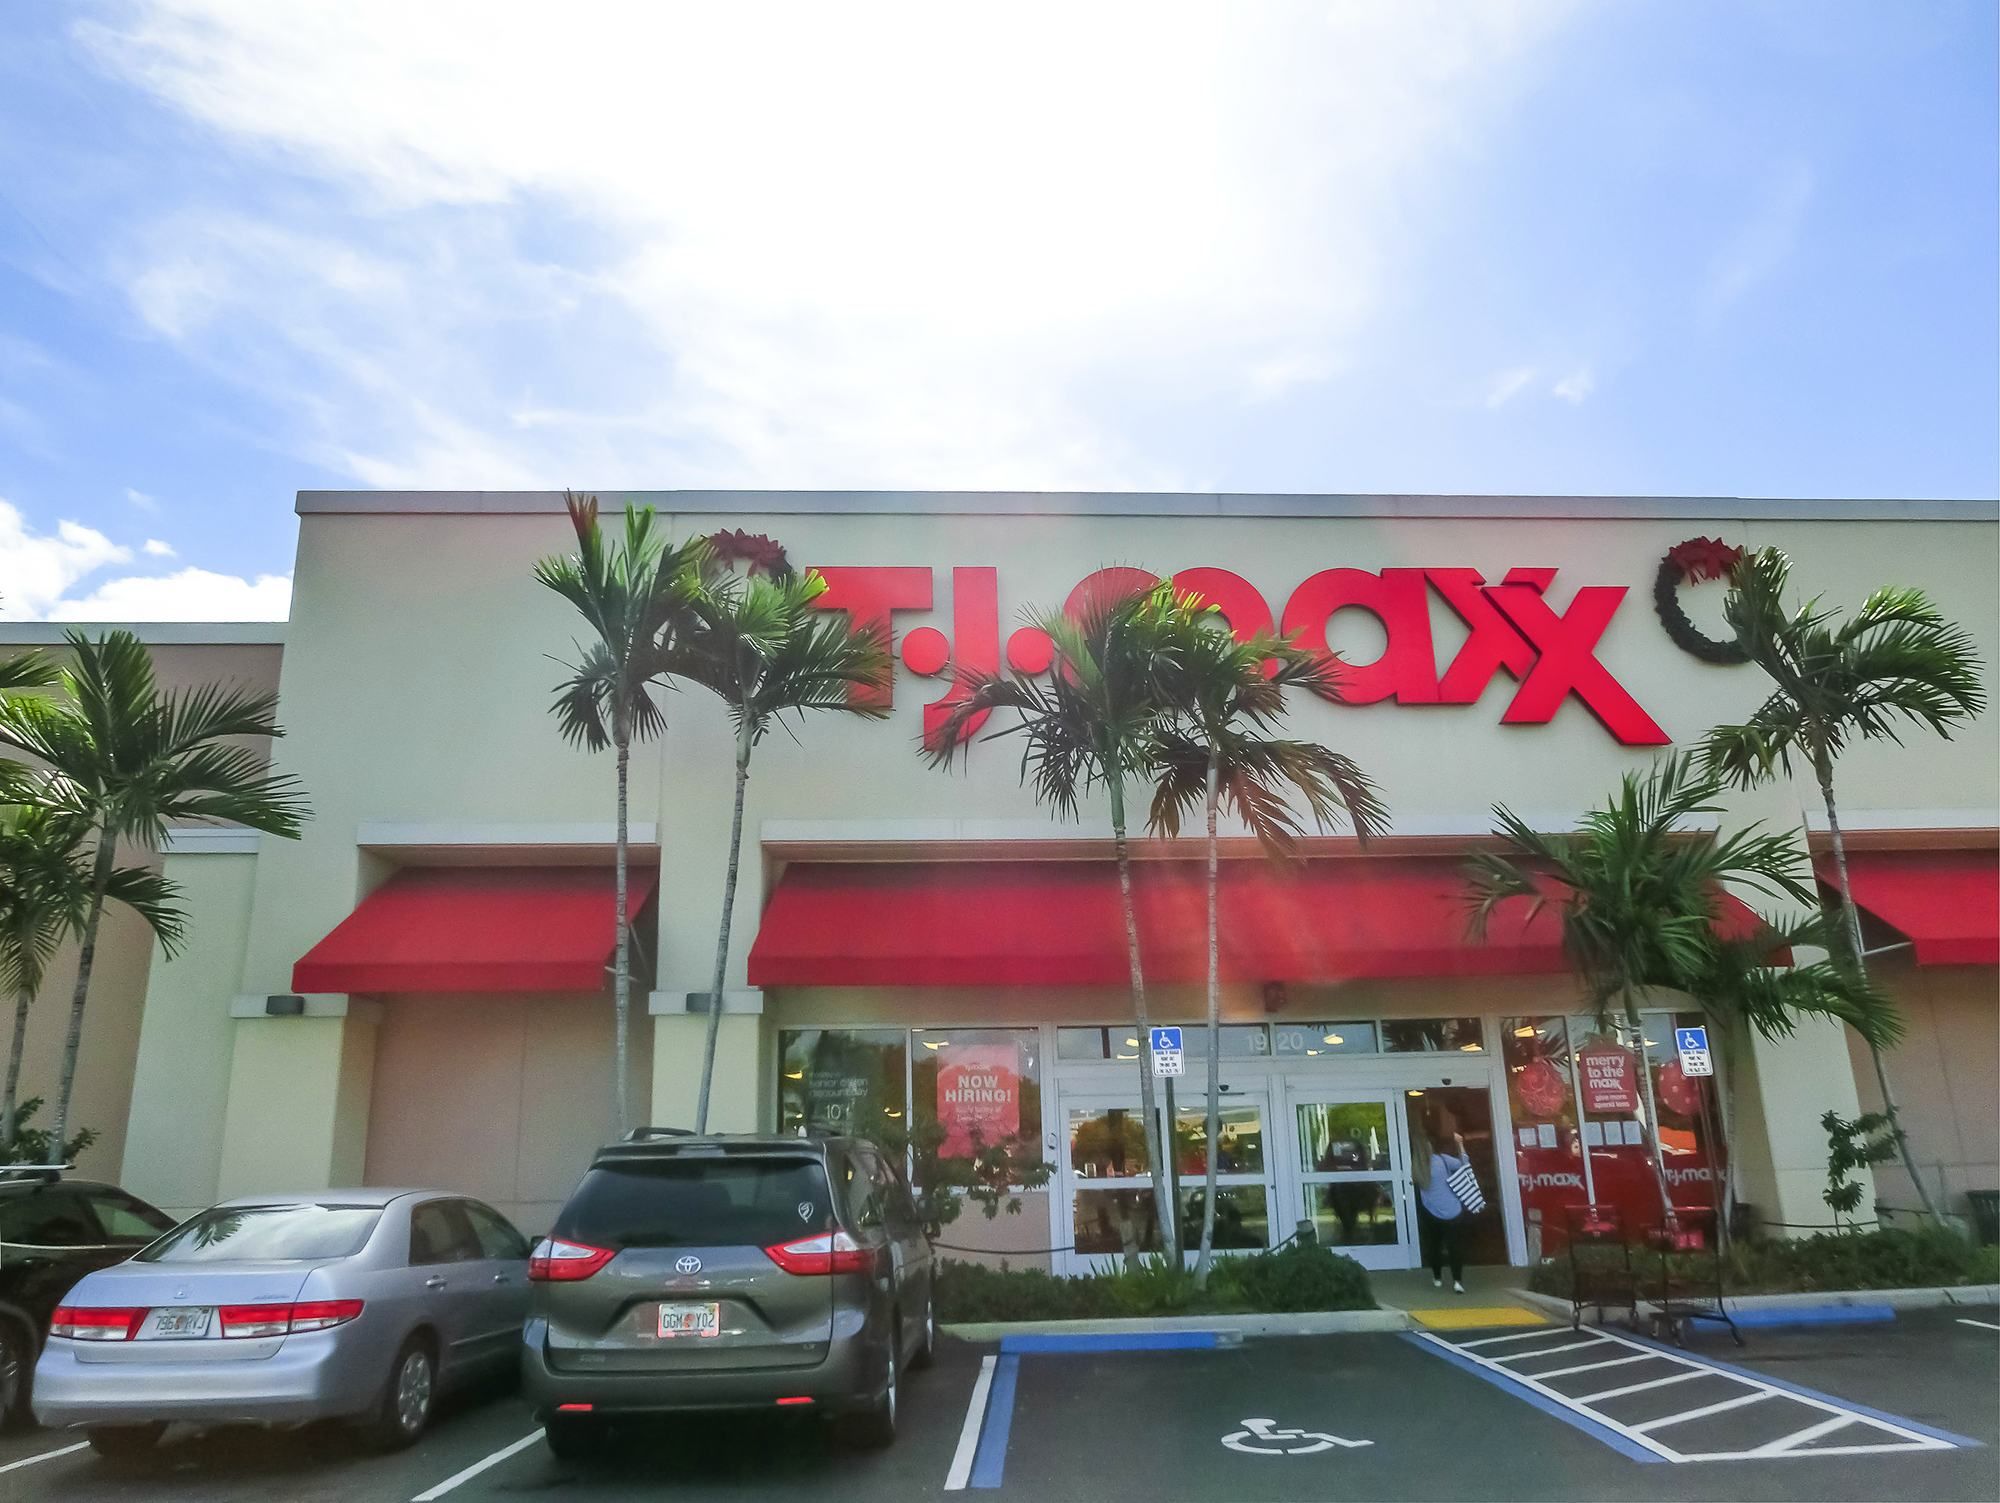 TJ Maxx shoppers say no arbitration for class action privacy claims